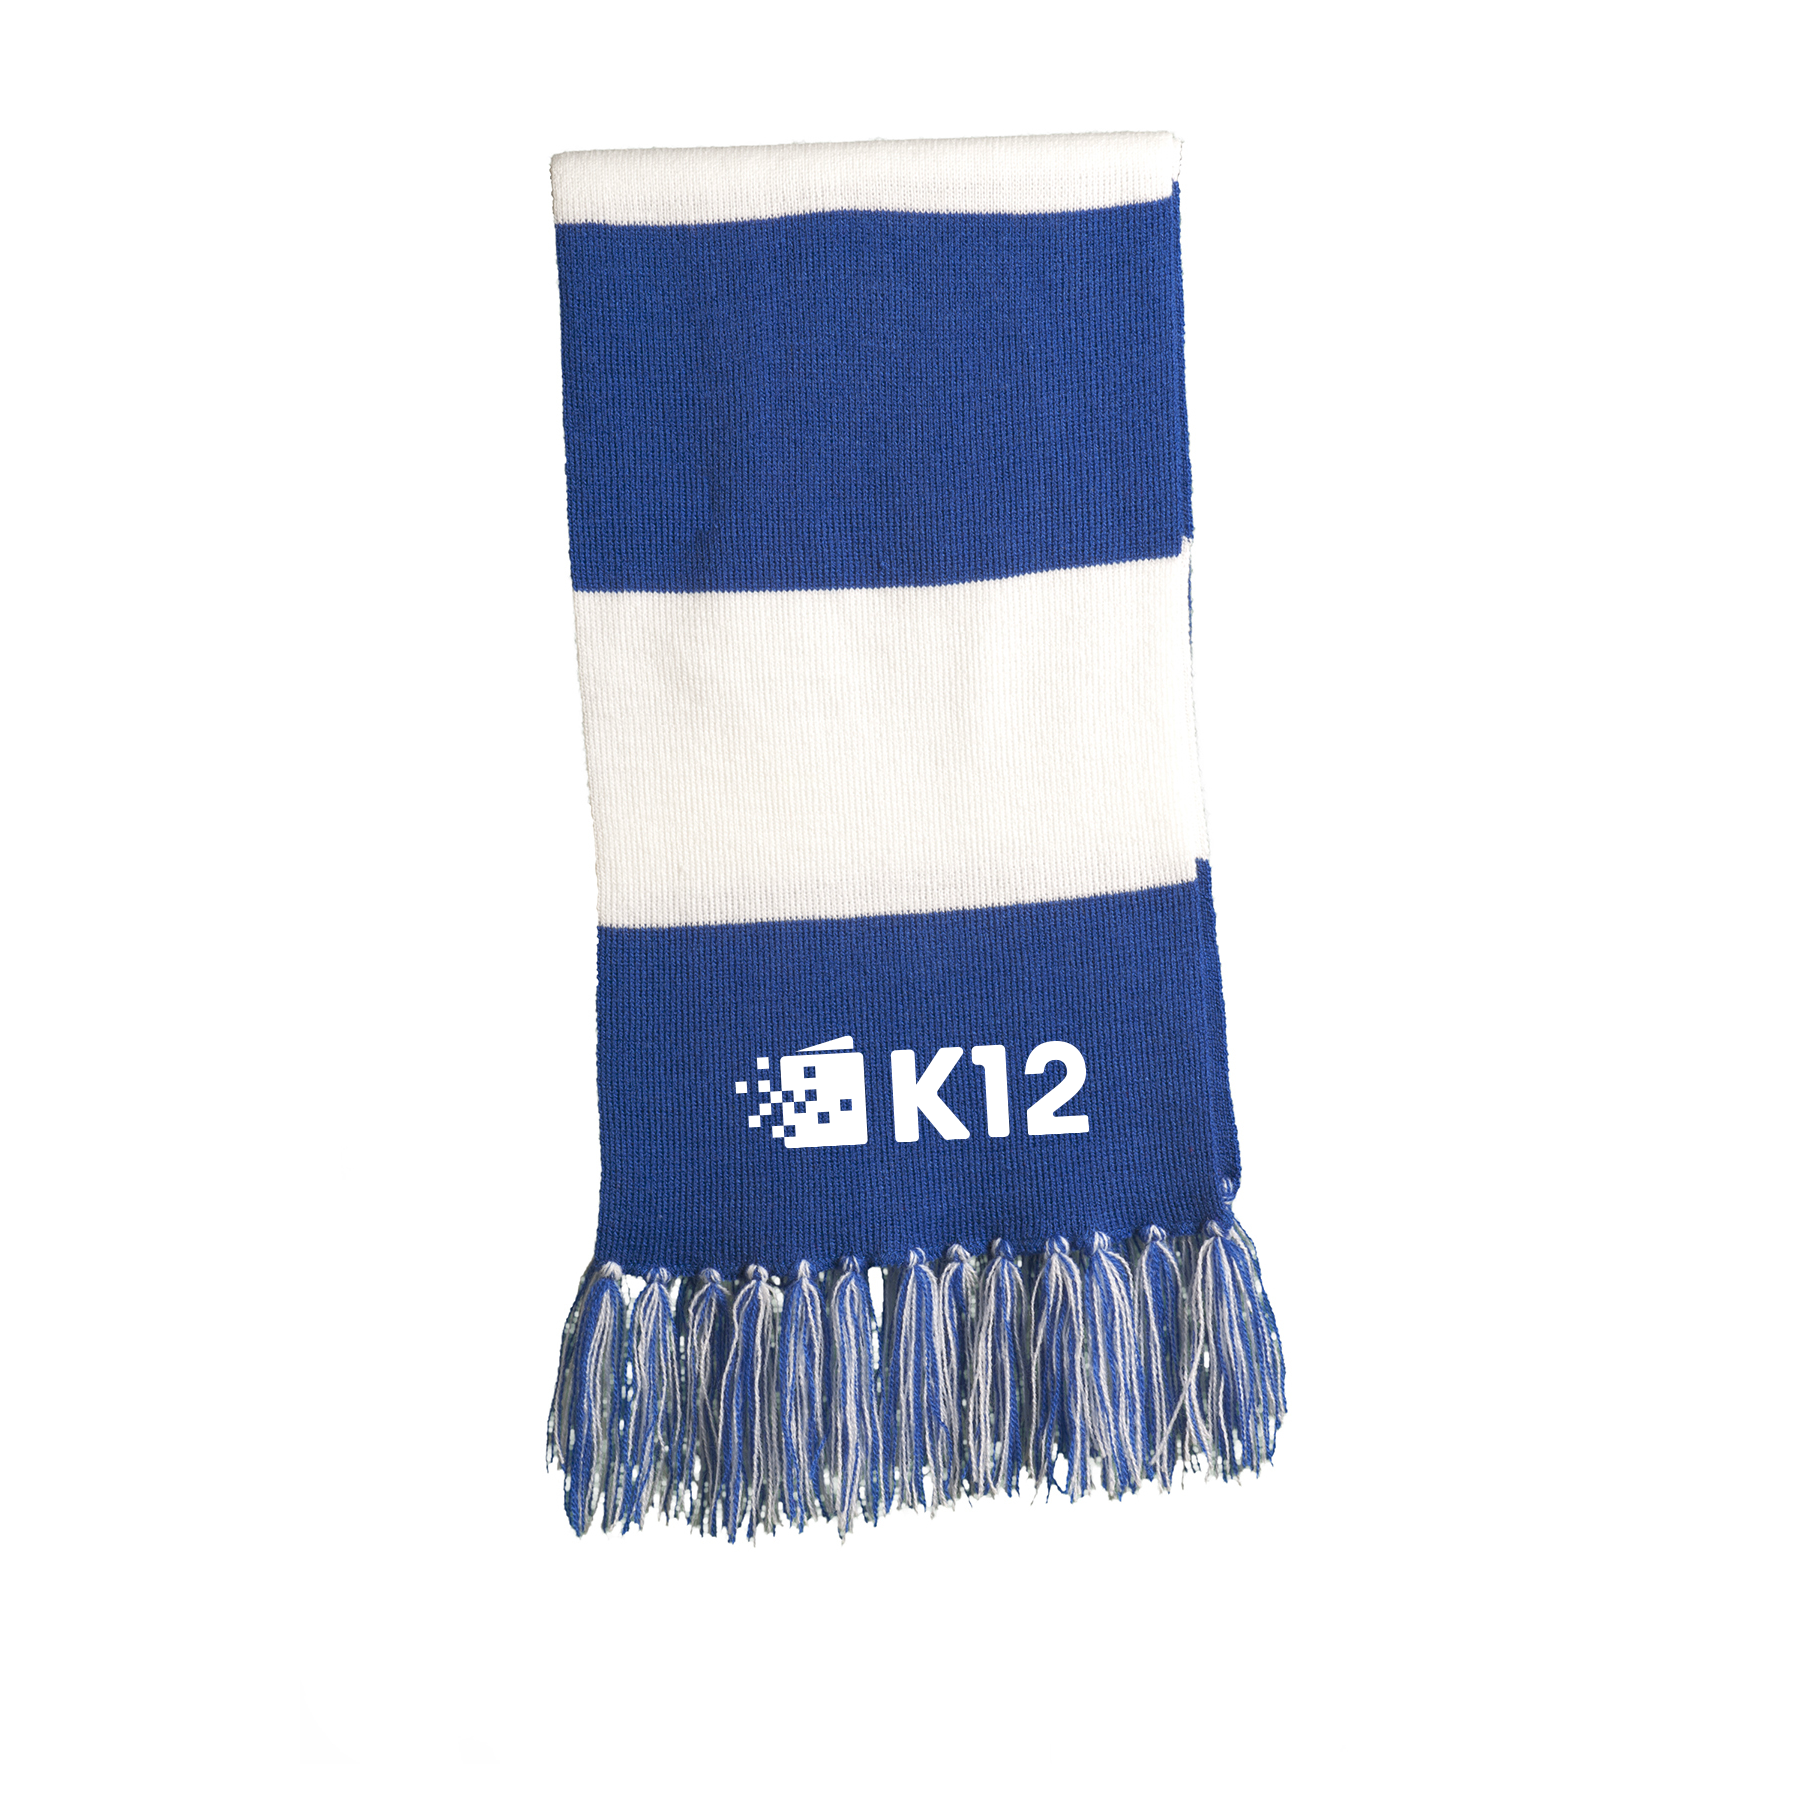 K12 EMBROIDERED SPECTATOR SCARF